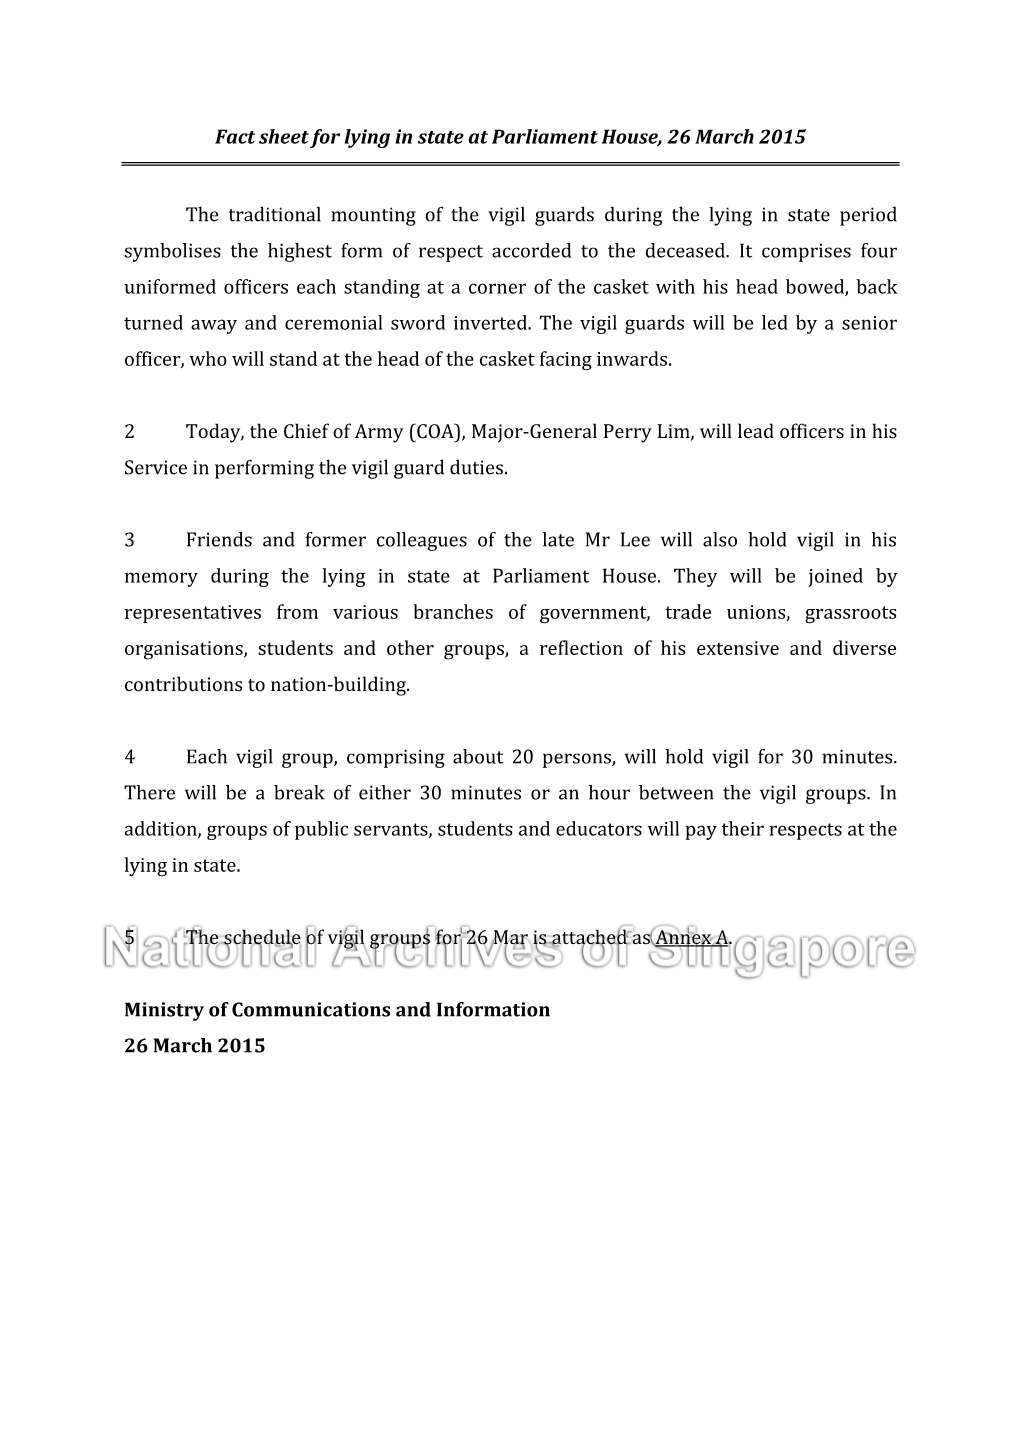 Fact Sheet for Lying in State at Parliament House, 26 March 2015 the Traditional Mounting of the Vigil Guards During the Lying